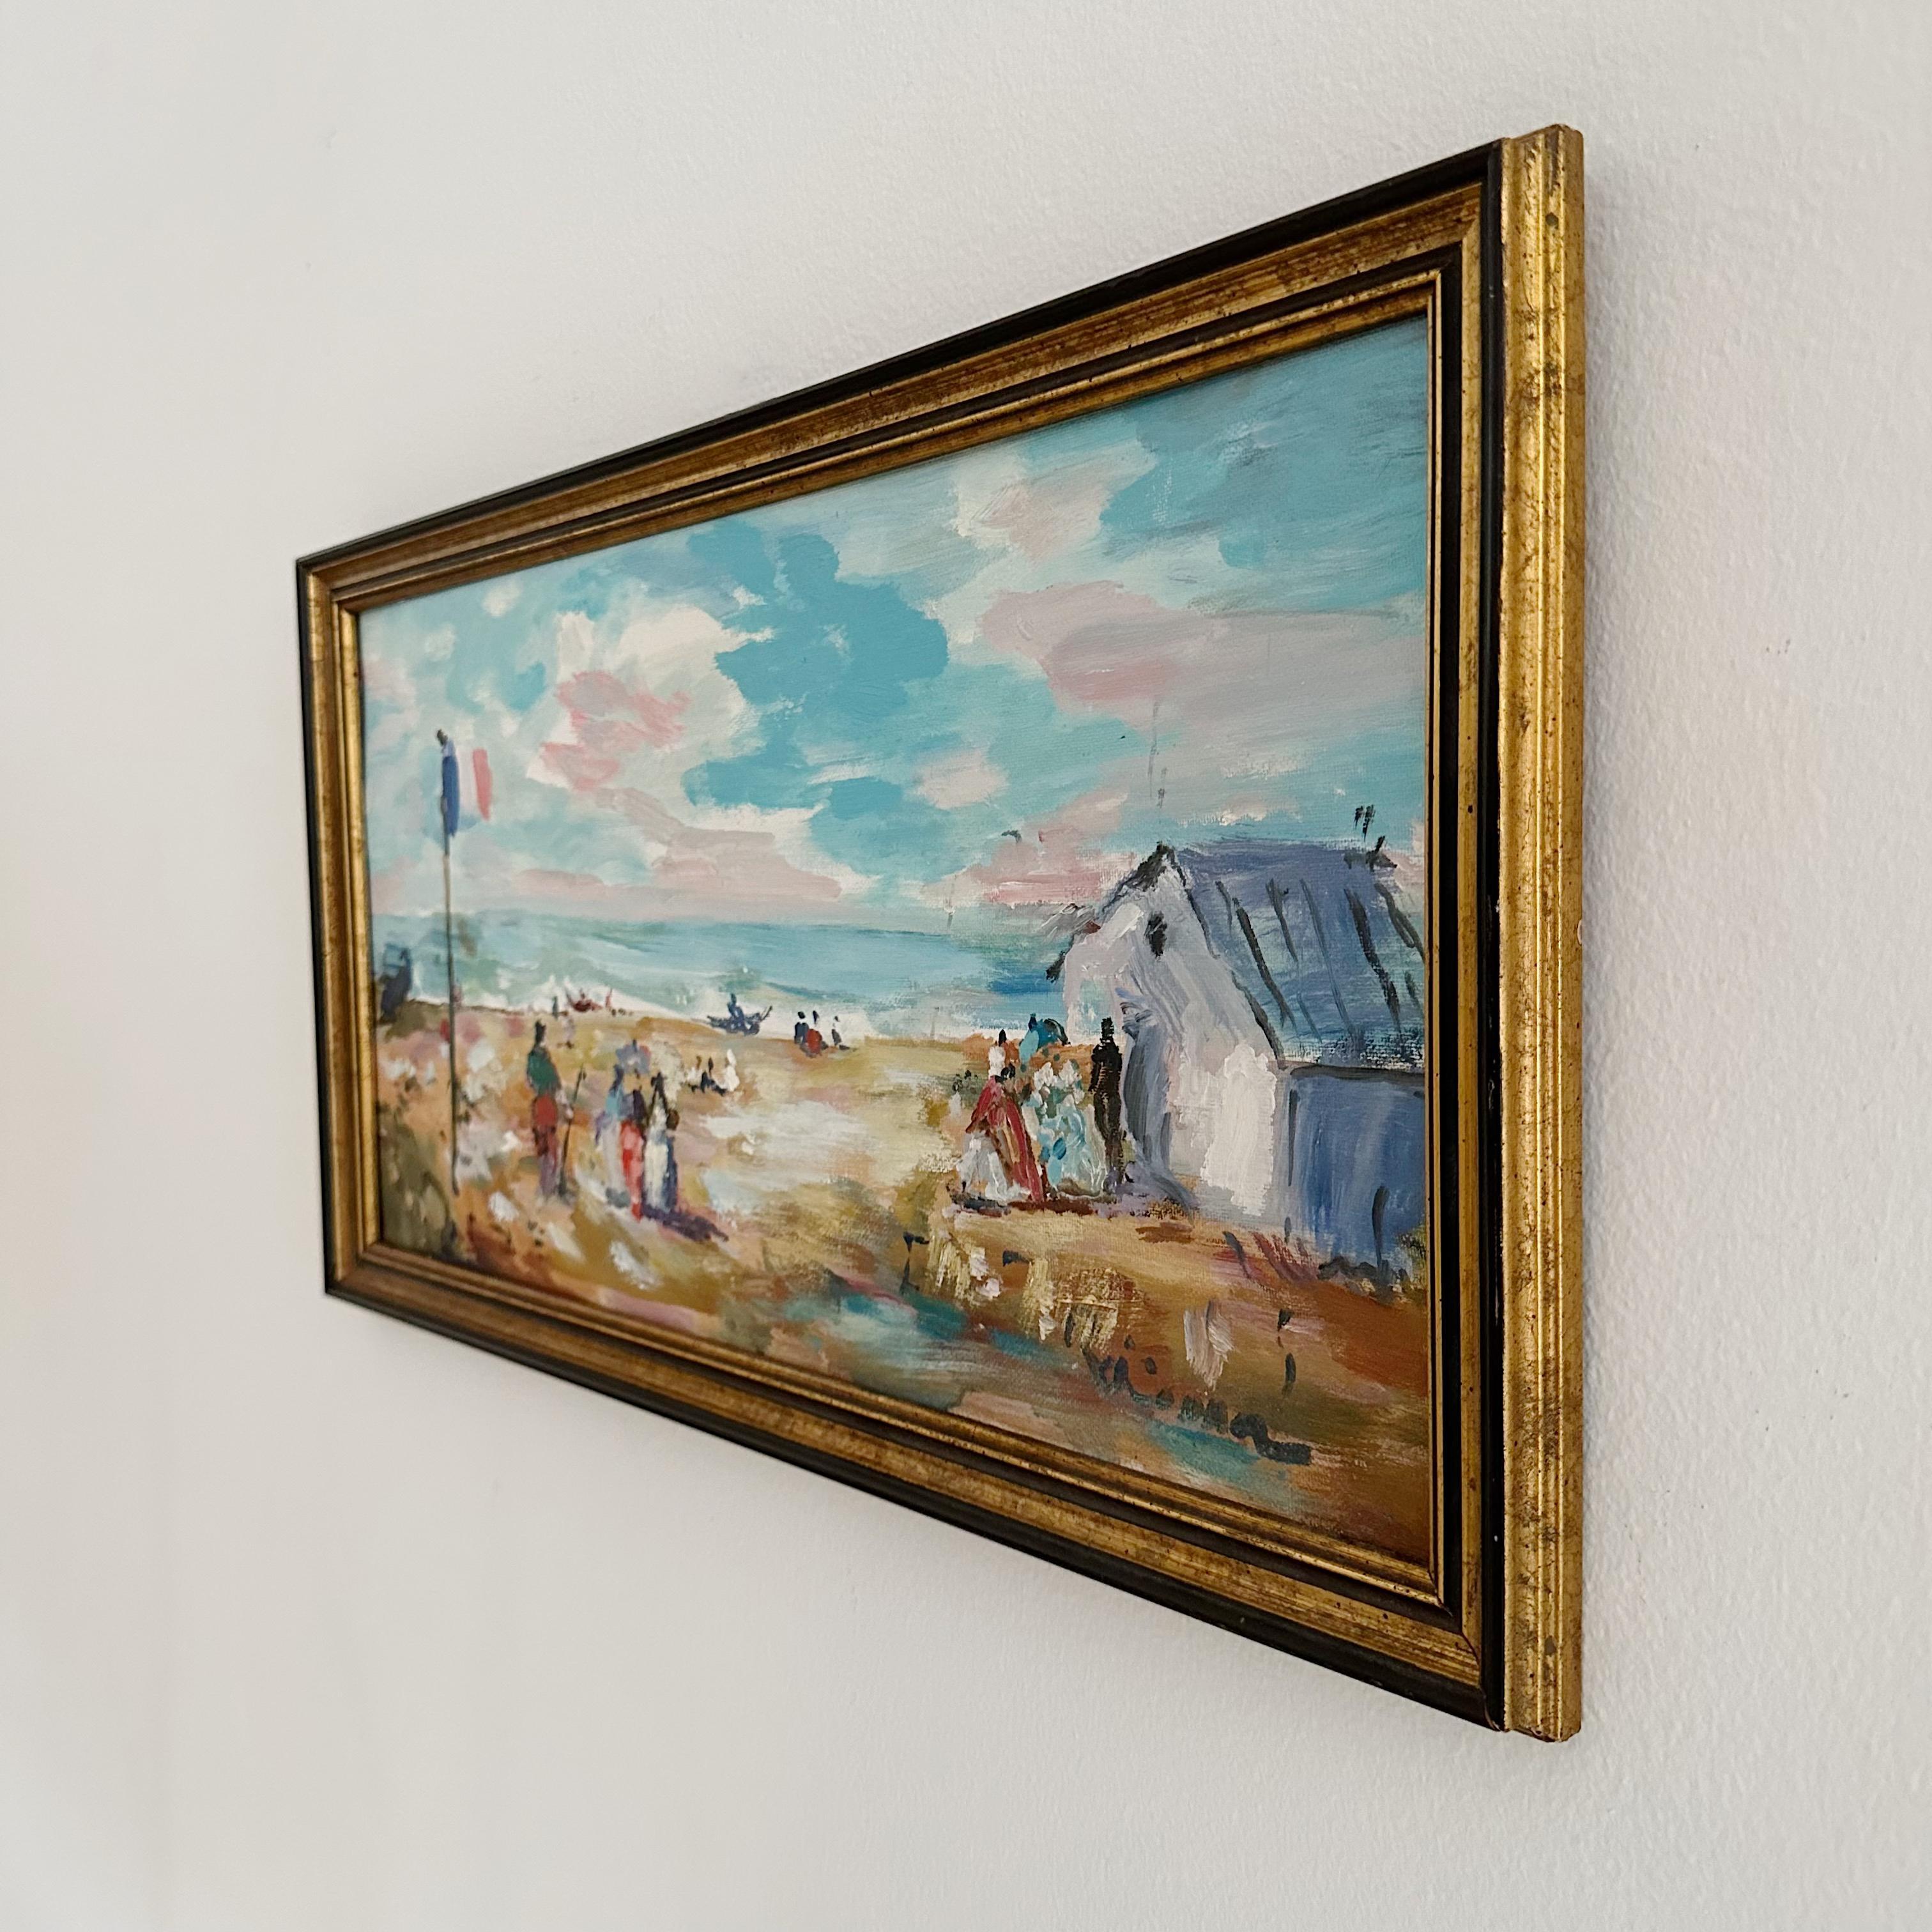 Victorian Busy Beach scene, seascape, French School 20th century. Colorful painting with sky blue, pink, white and varying colors. Oil on board in vintage gold and black frame. Illegible signature to the lower right.